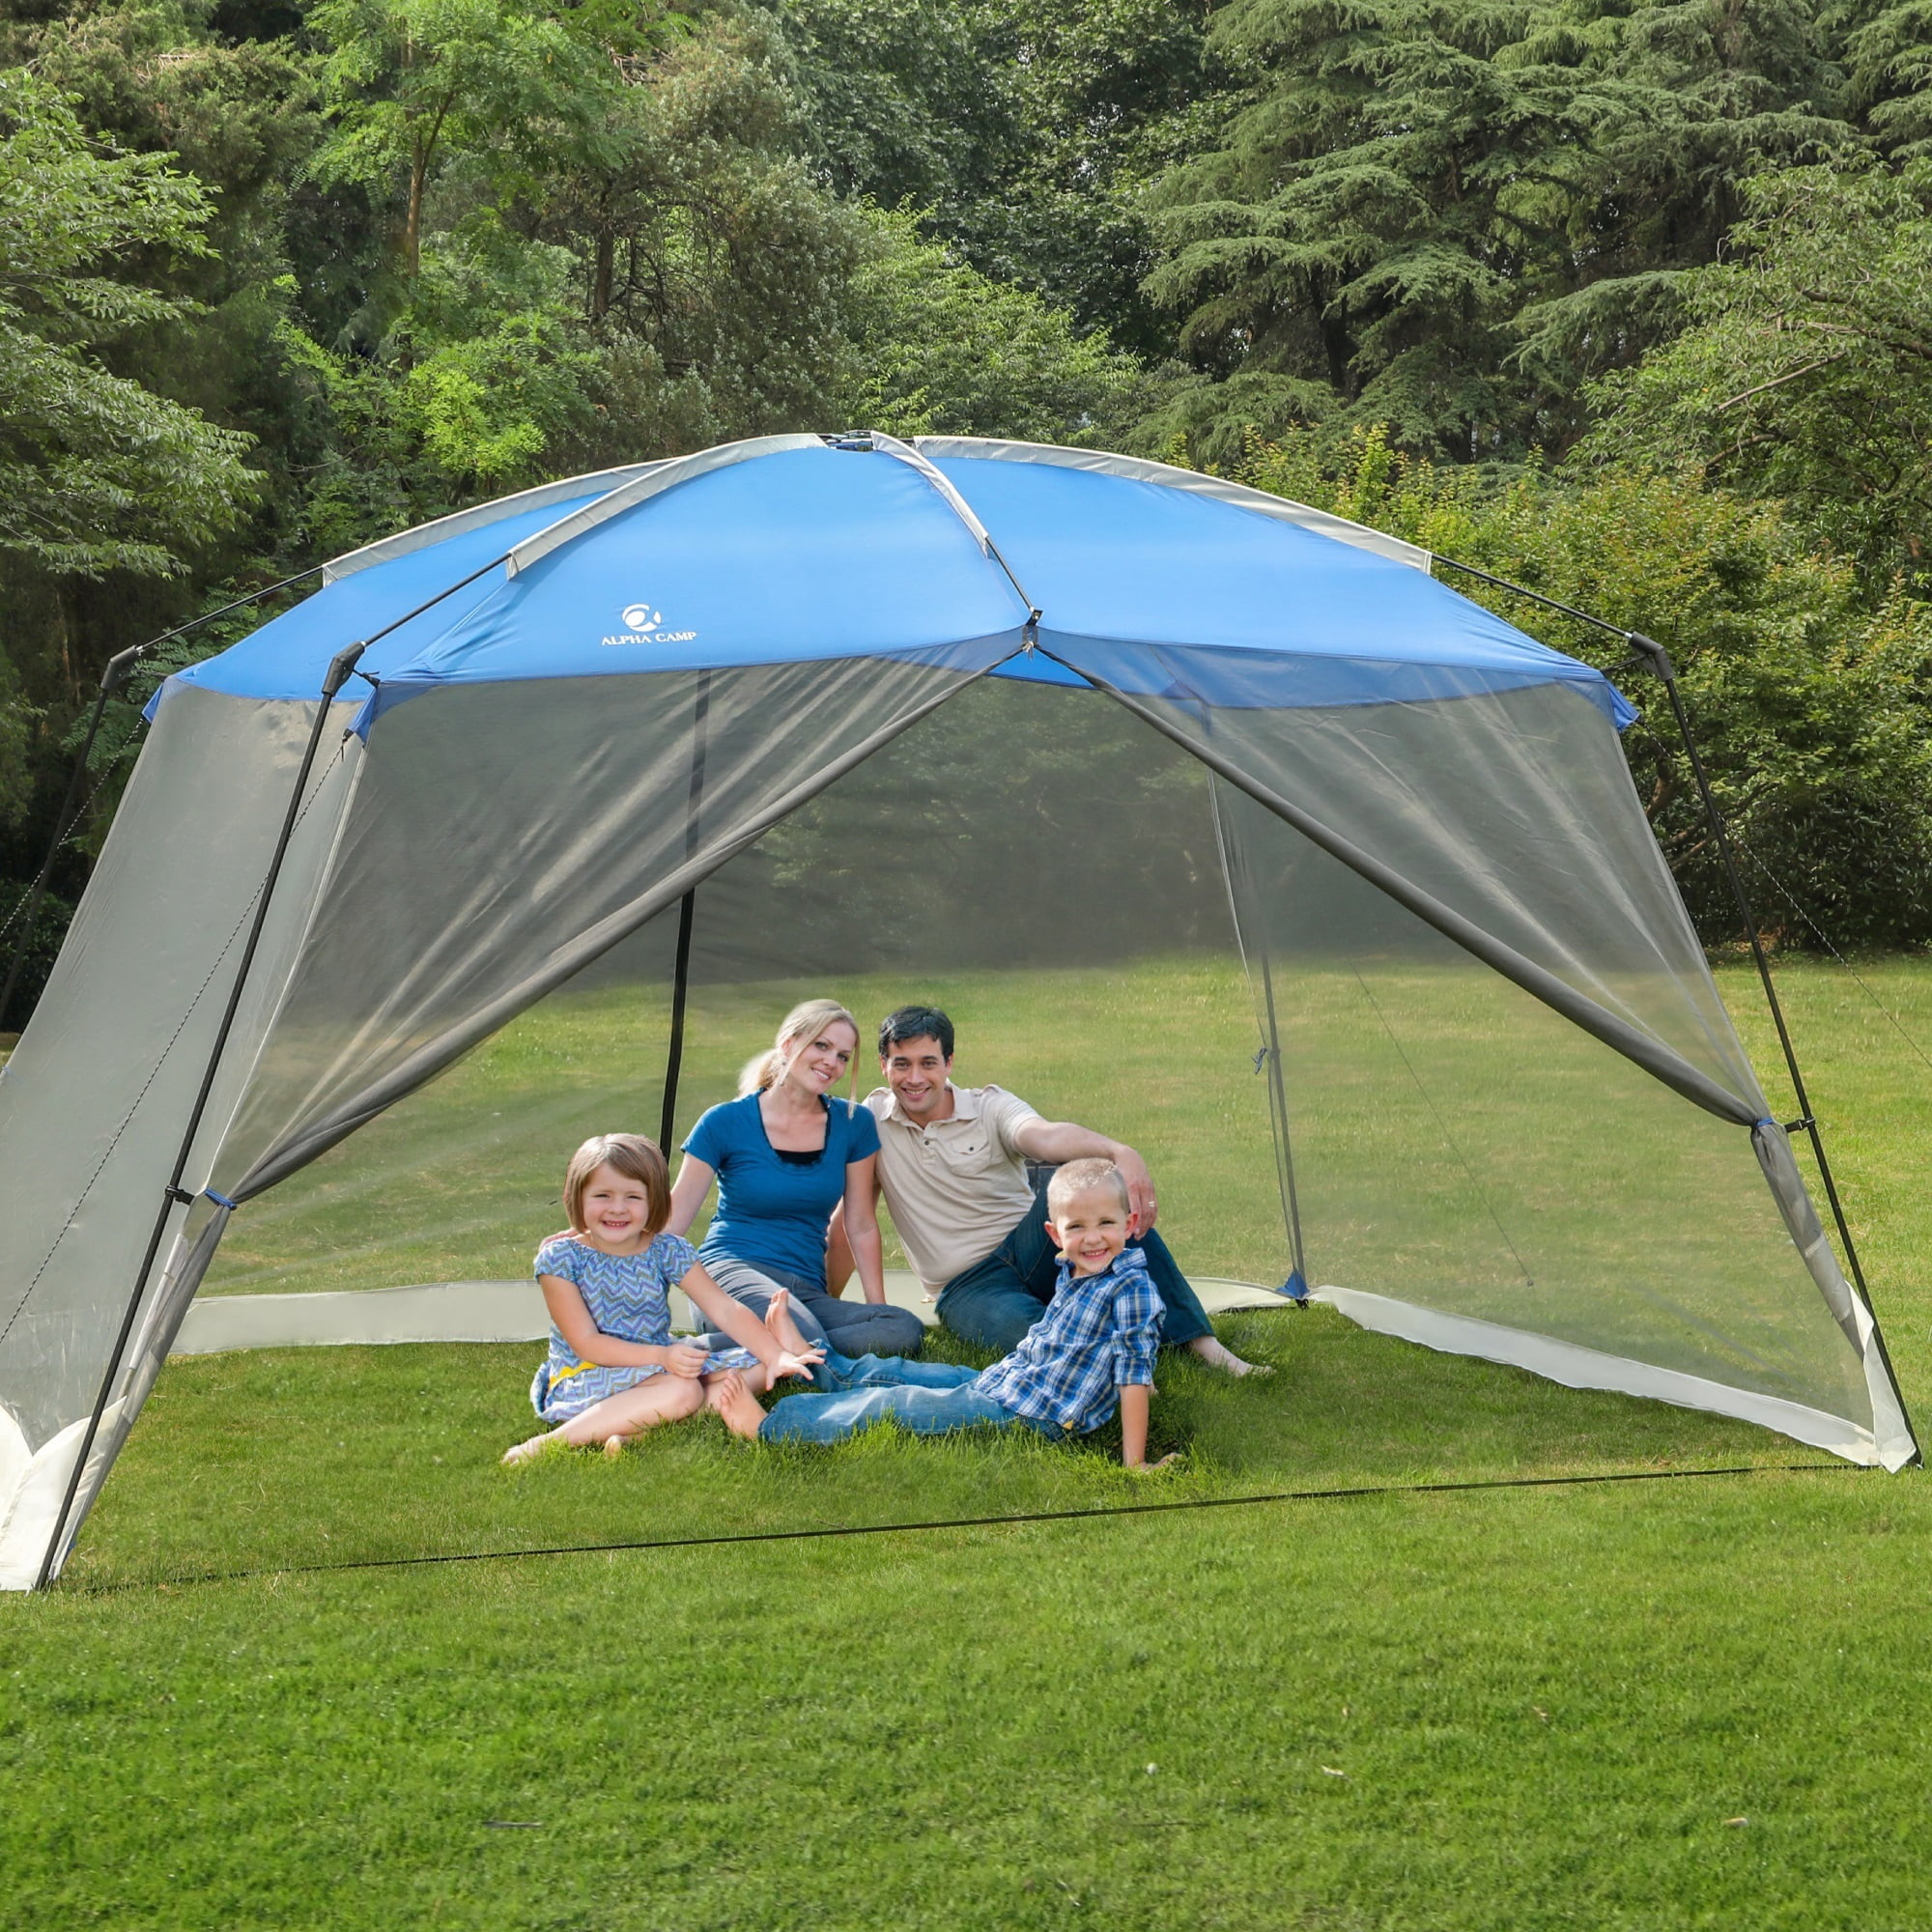 Alpha Camper 13' x 9' Screen House Canopy Sun Shade with One Room, Blue - image 1 of 9